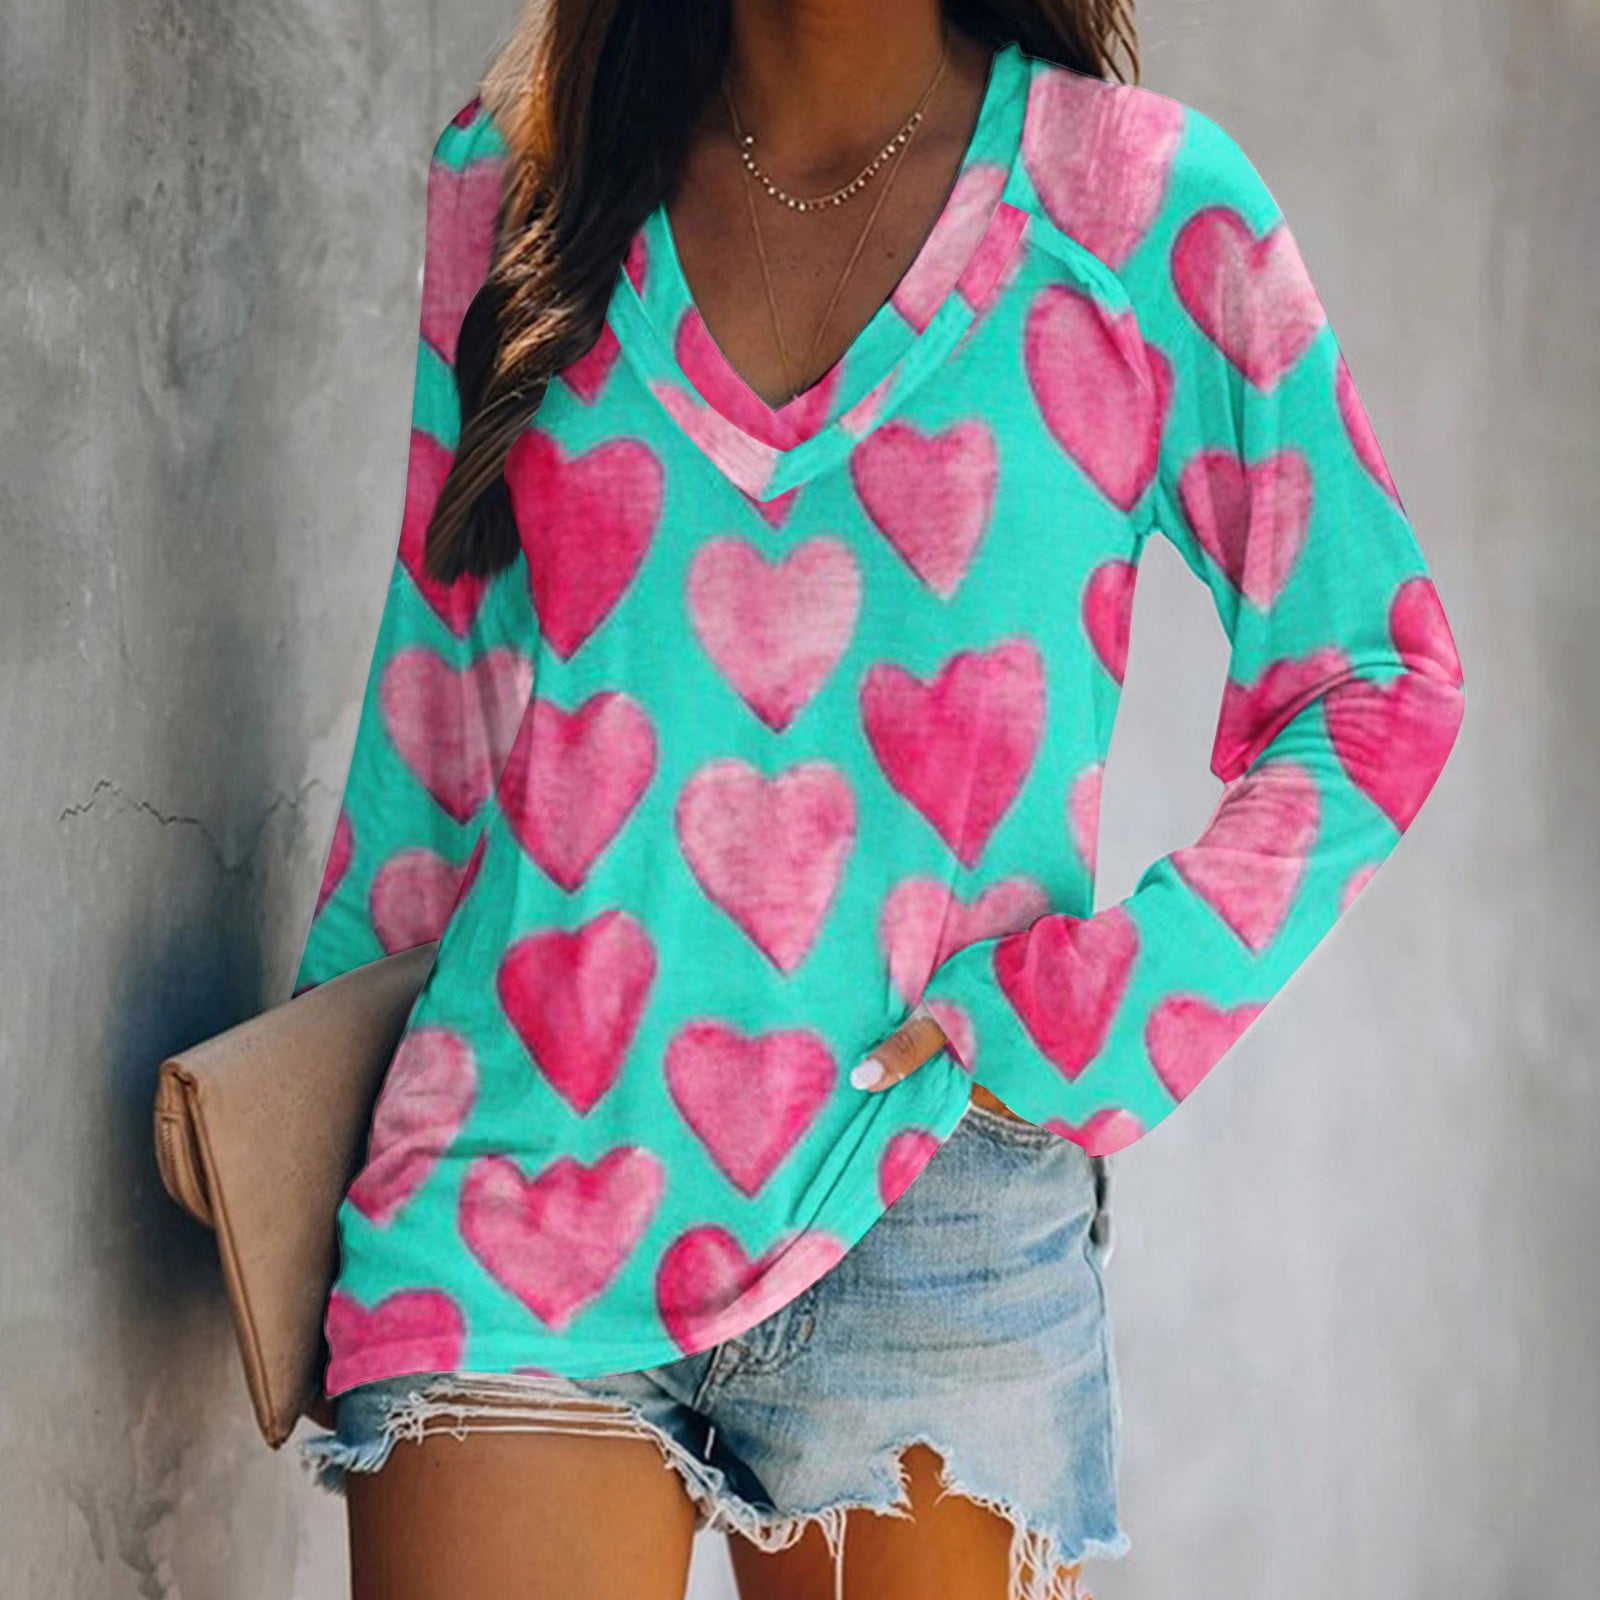 Pink and blue printed loose-fitting shirt